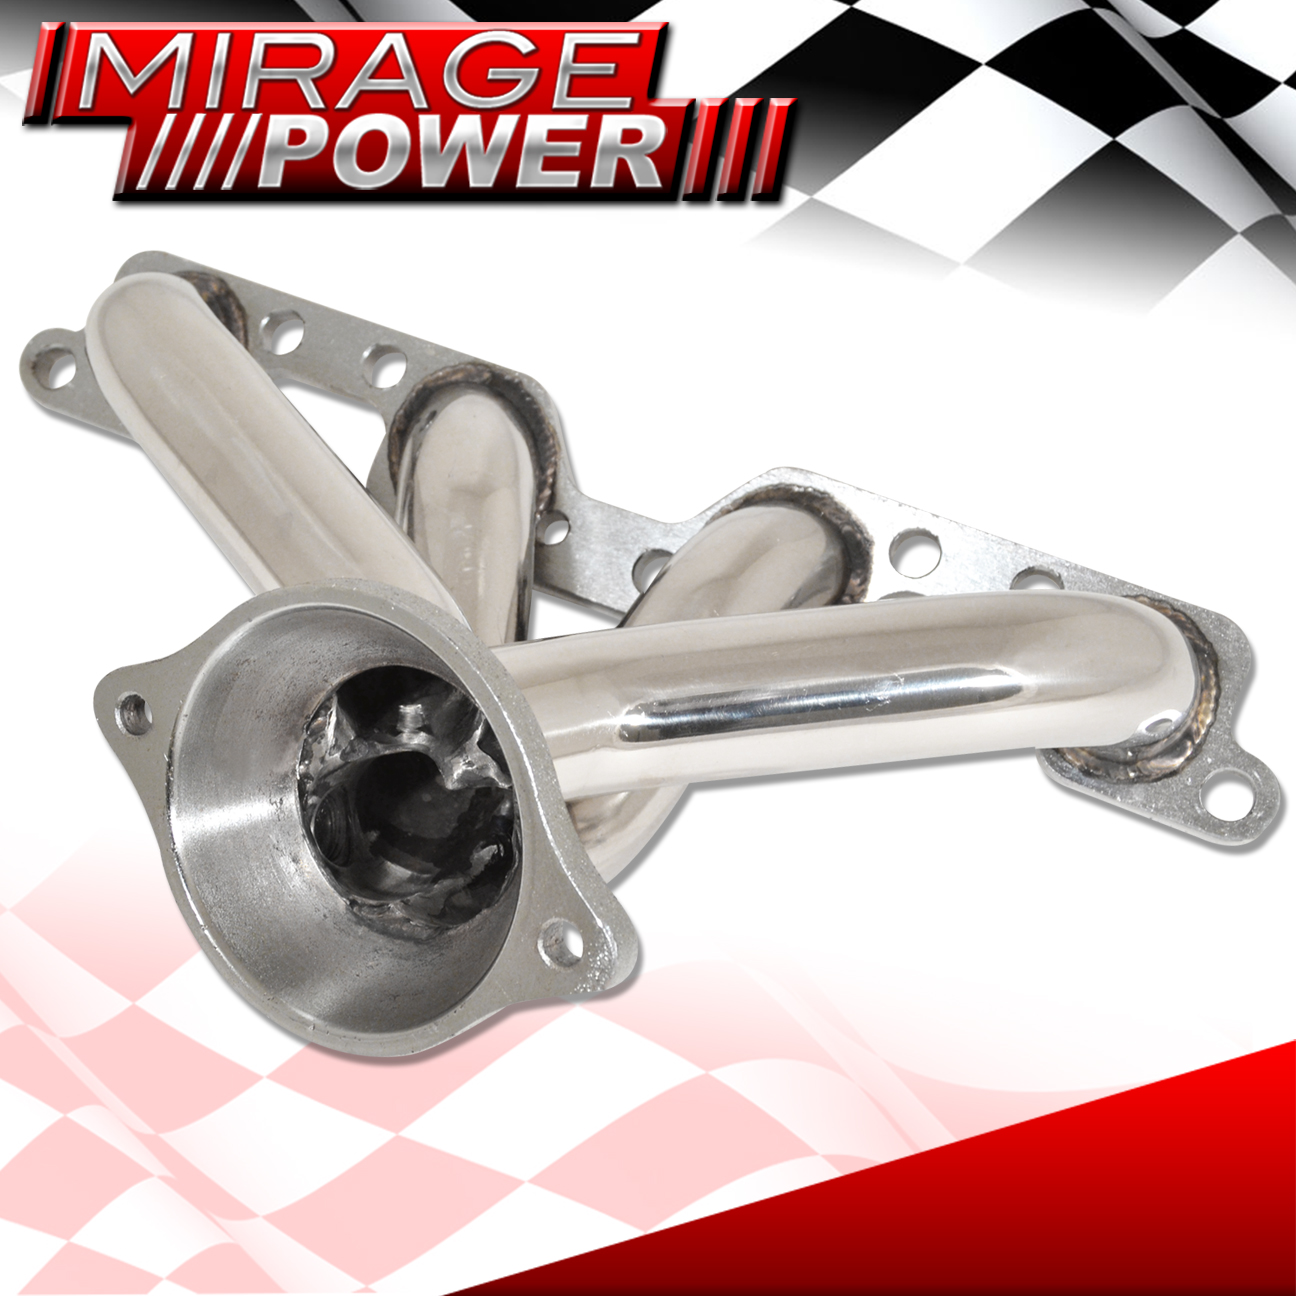 For 9599 Dodge Plymouth Neon 2.0 SOHC A588 Steel Racing